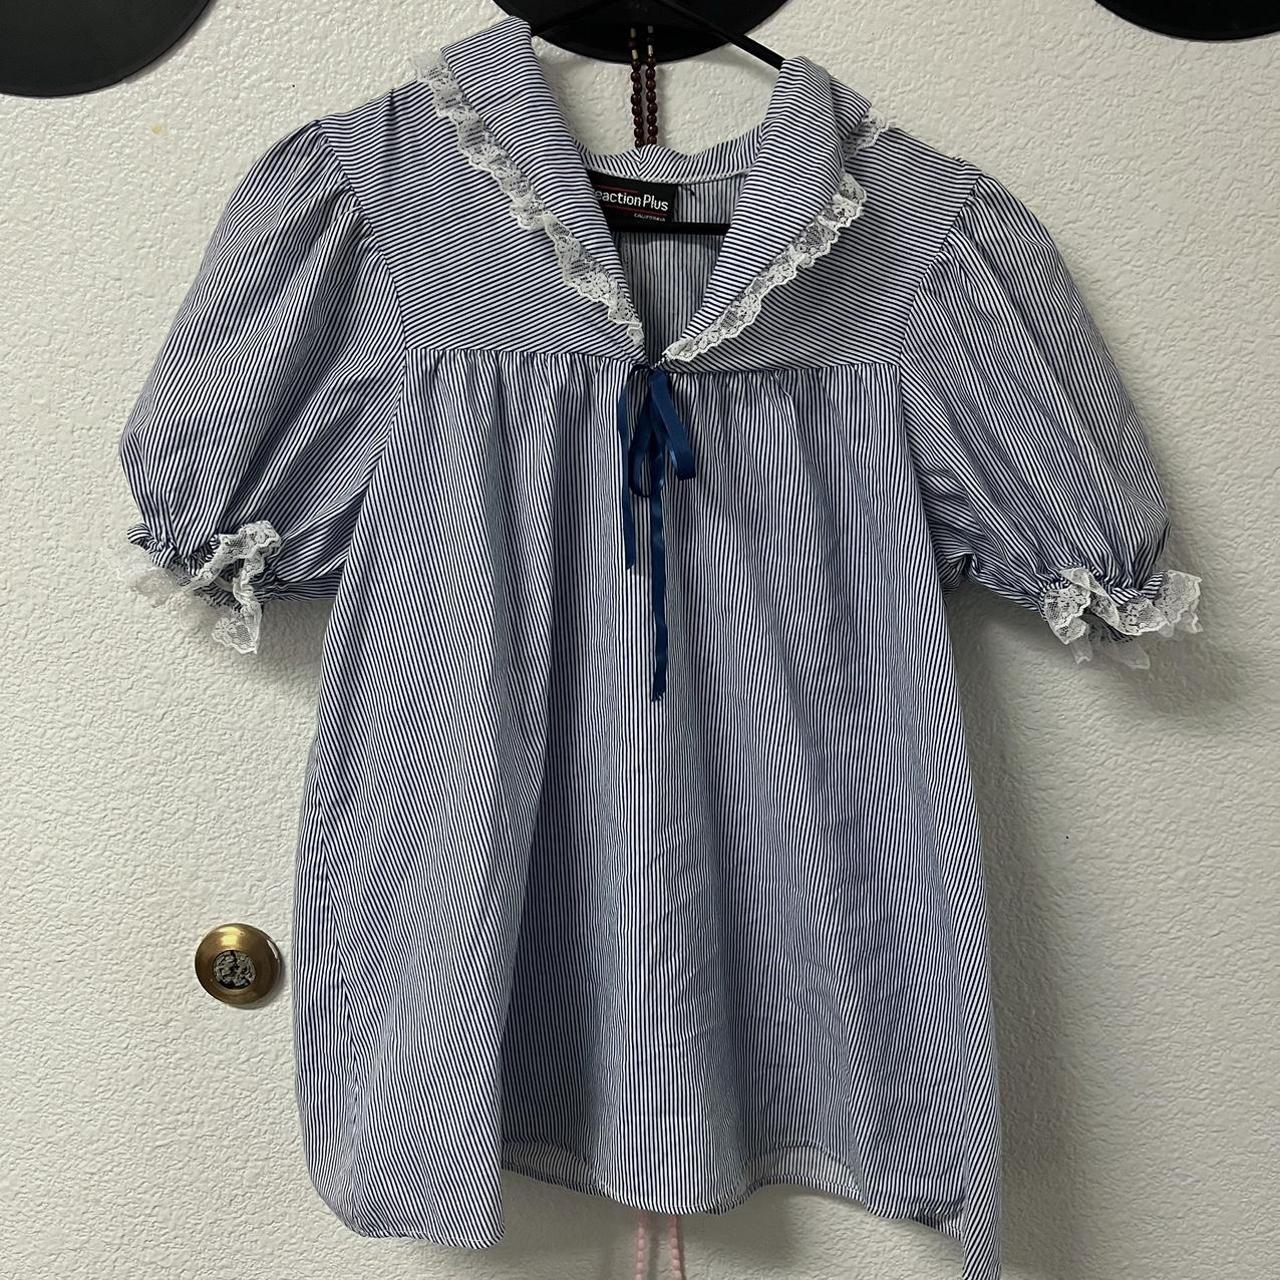 Women's Blue and White Blouse | Depop